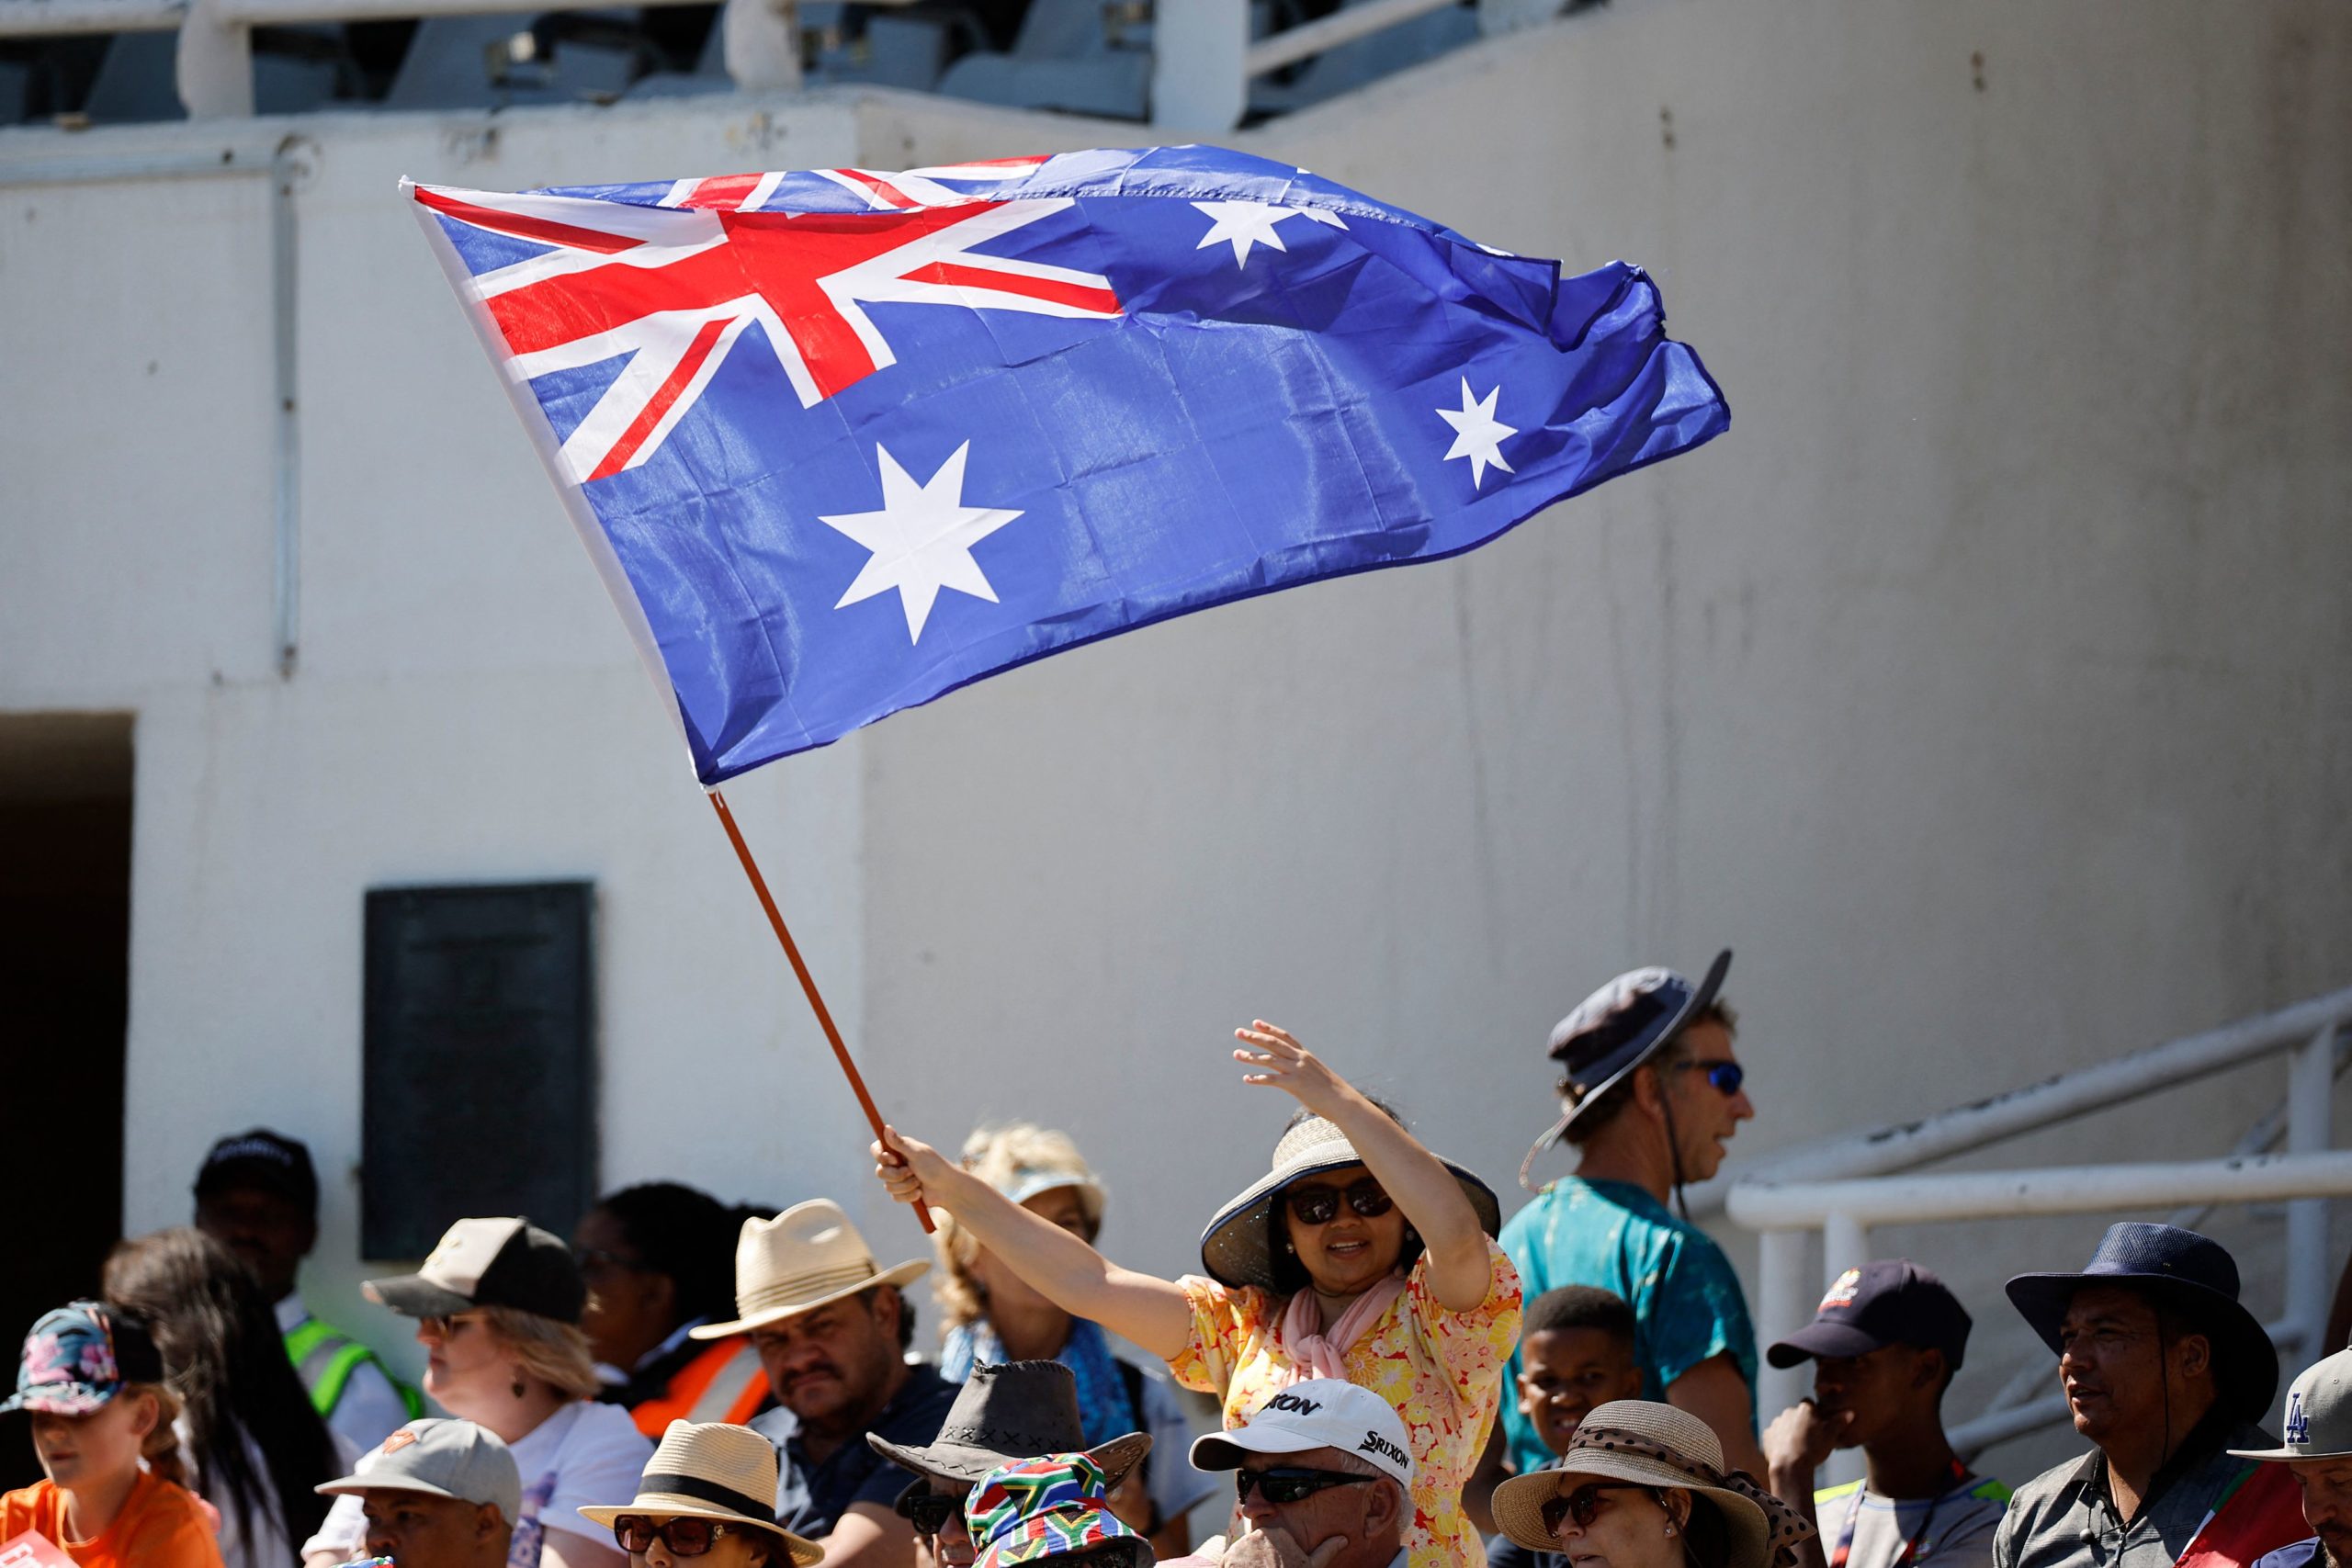 An Australian supporter waves the Australia flag during the final T20 women's World Cup cricket match between South Africa and Australia at Newlands Stadium in Cape Town on February 26, 2023. (Photo by Marco Longari / AFP) (Photo by MARCO LONGARI/AFP via Getty Images)